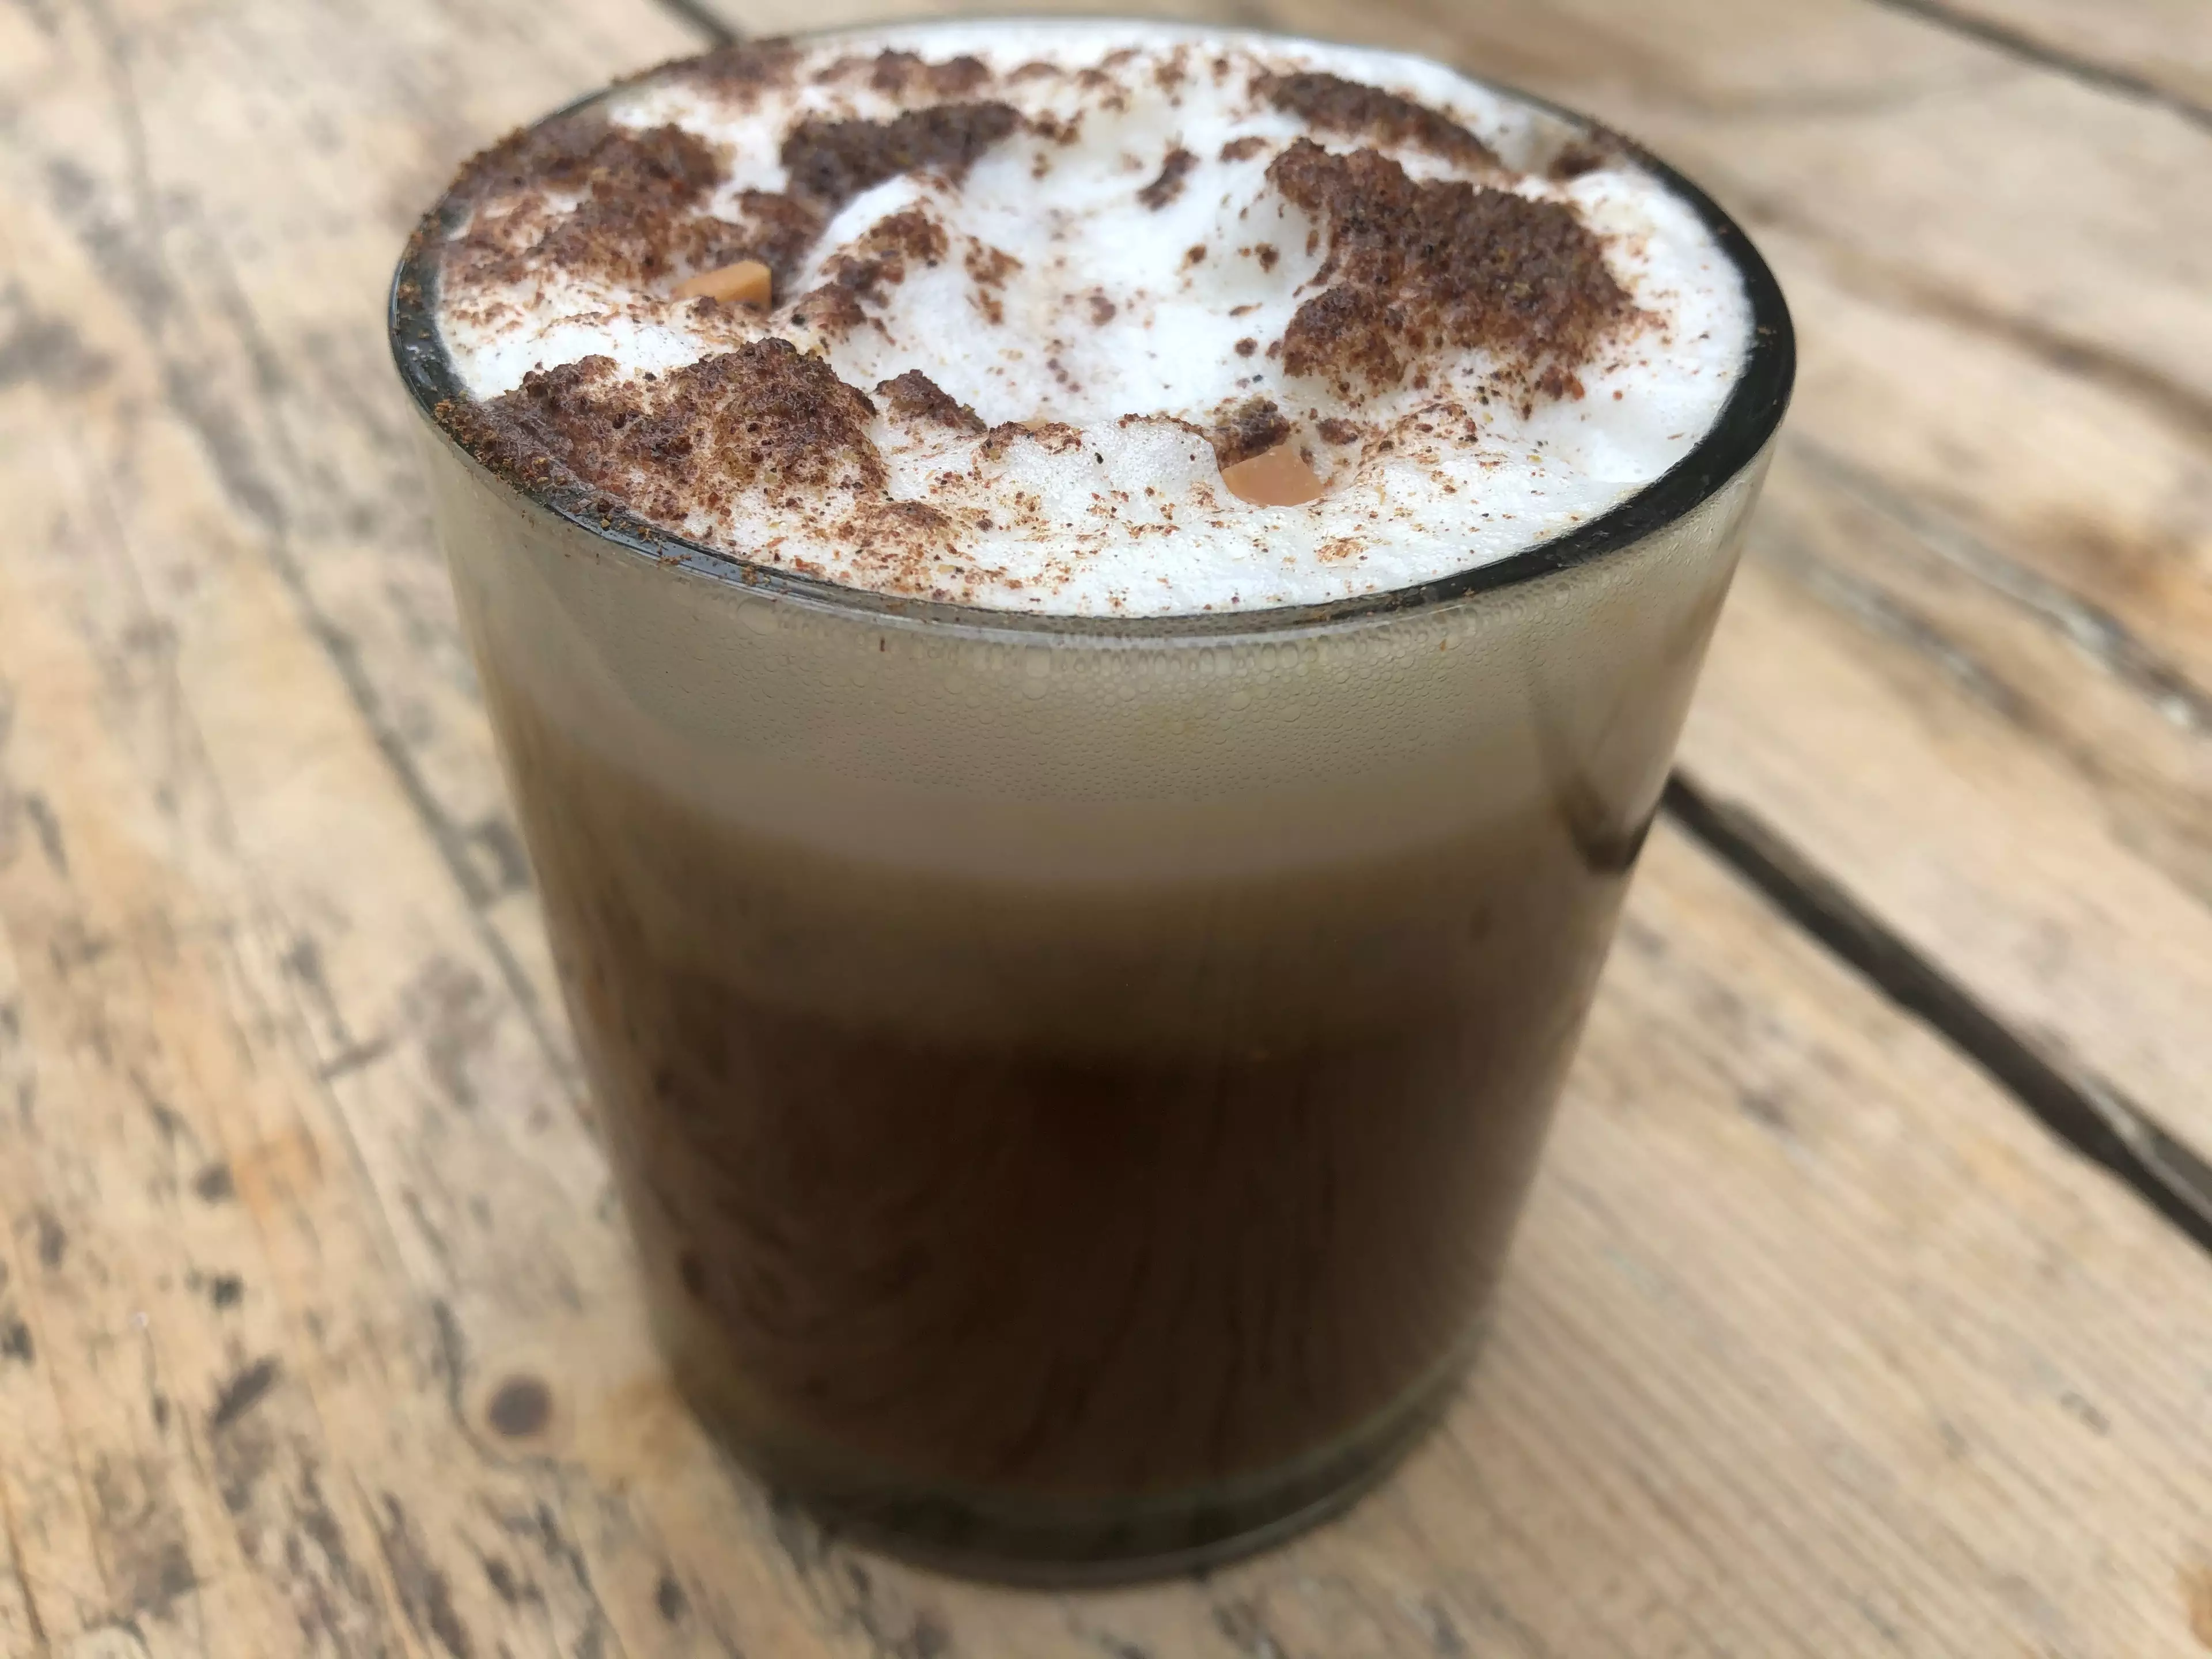 Celebrity chef Phil Vickery has created a recipe to make your own pumpkin spice latte at home (